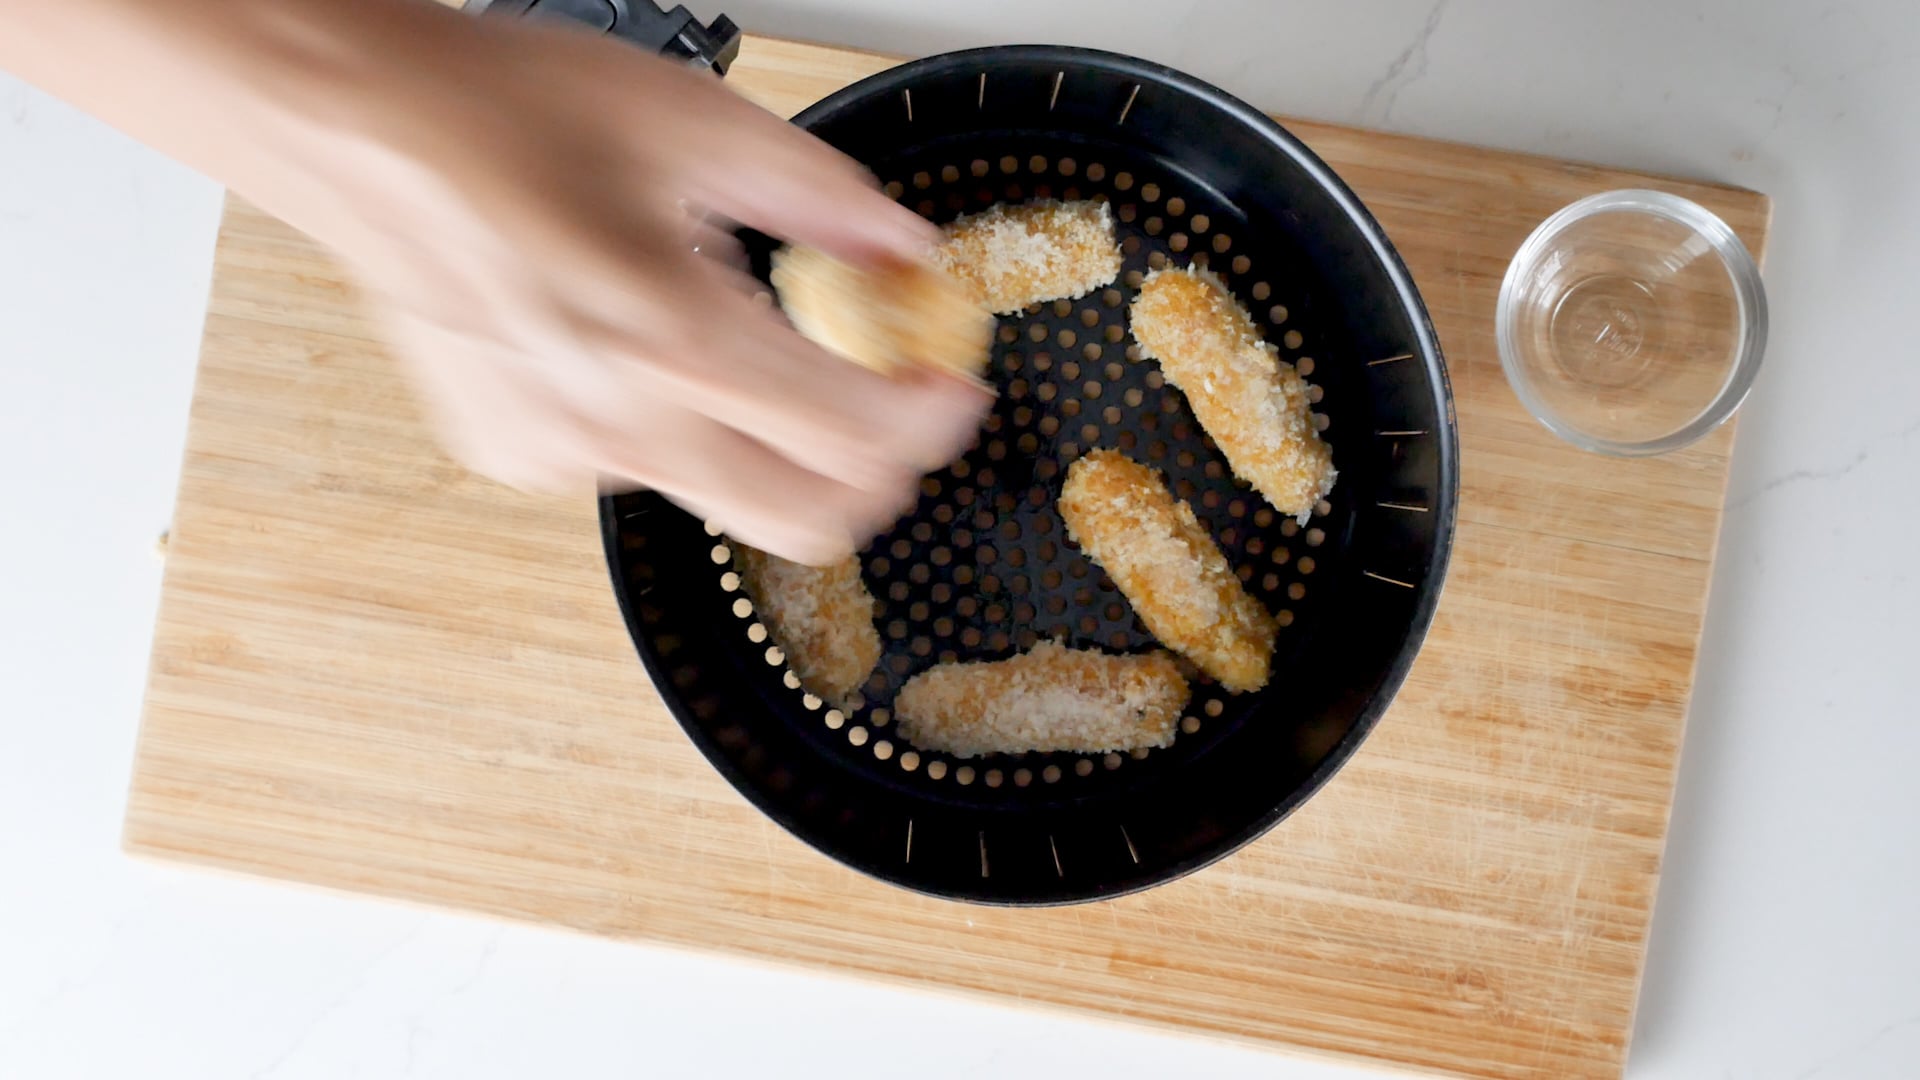 Putting in the air fryer tray